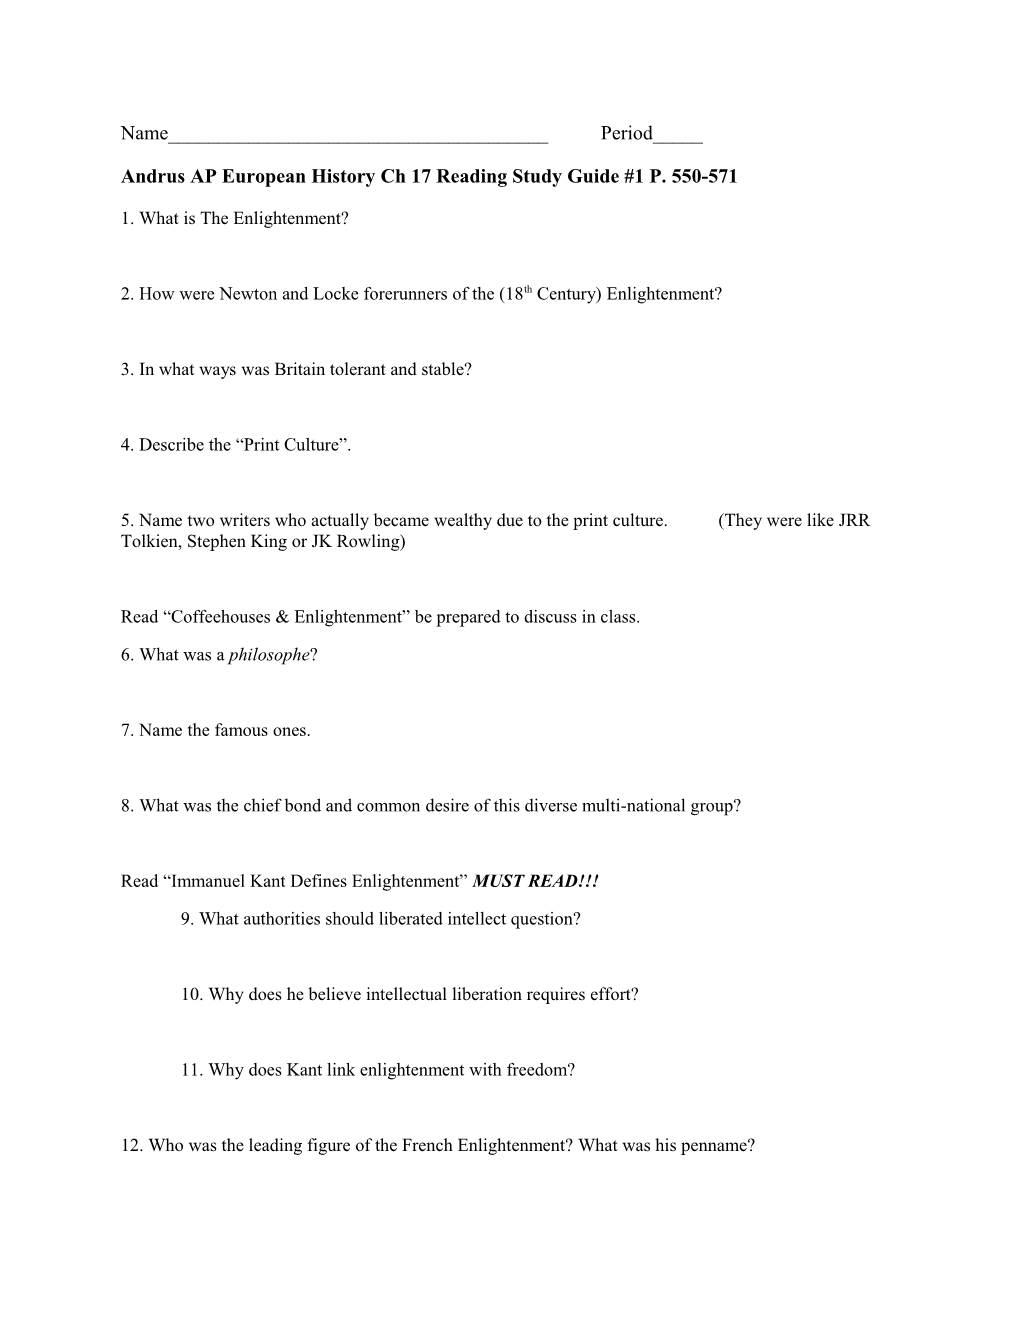 Andrus AP European History Ch 17 Reading Study Guide #1 P. 550-571